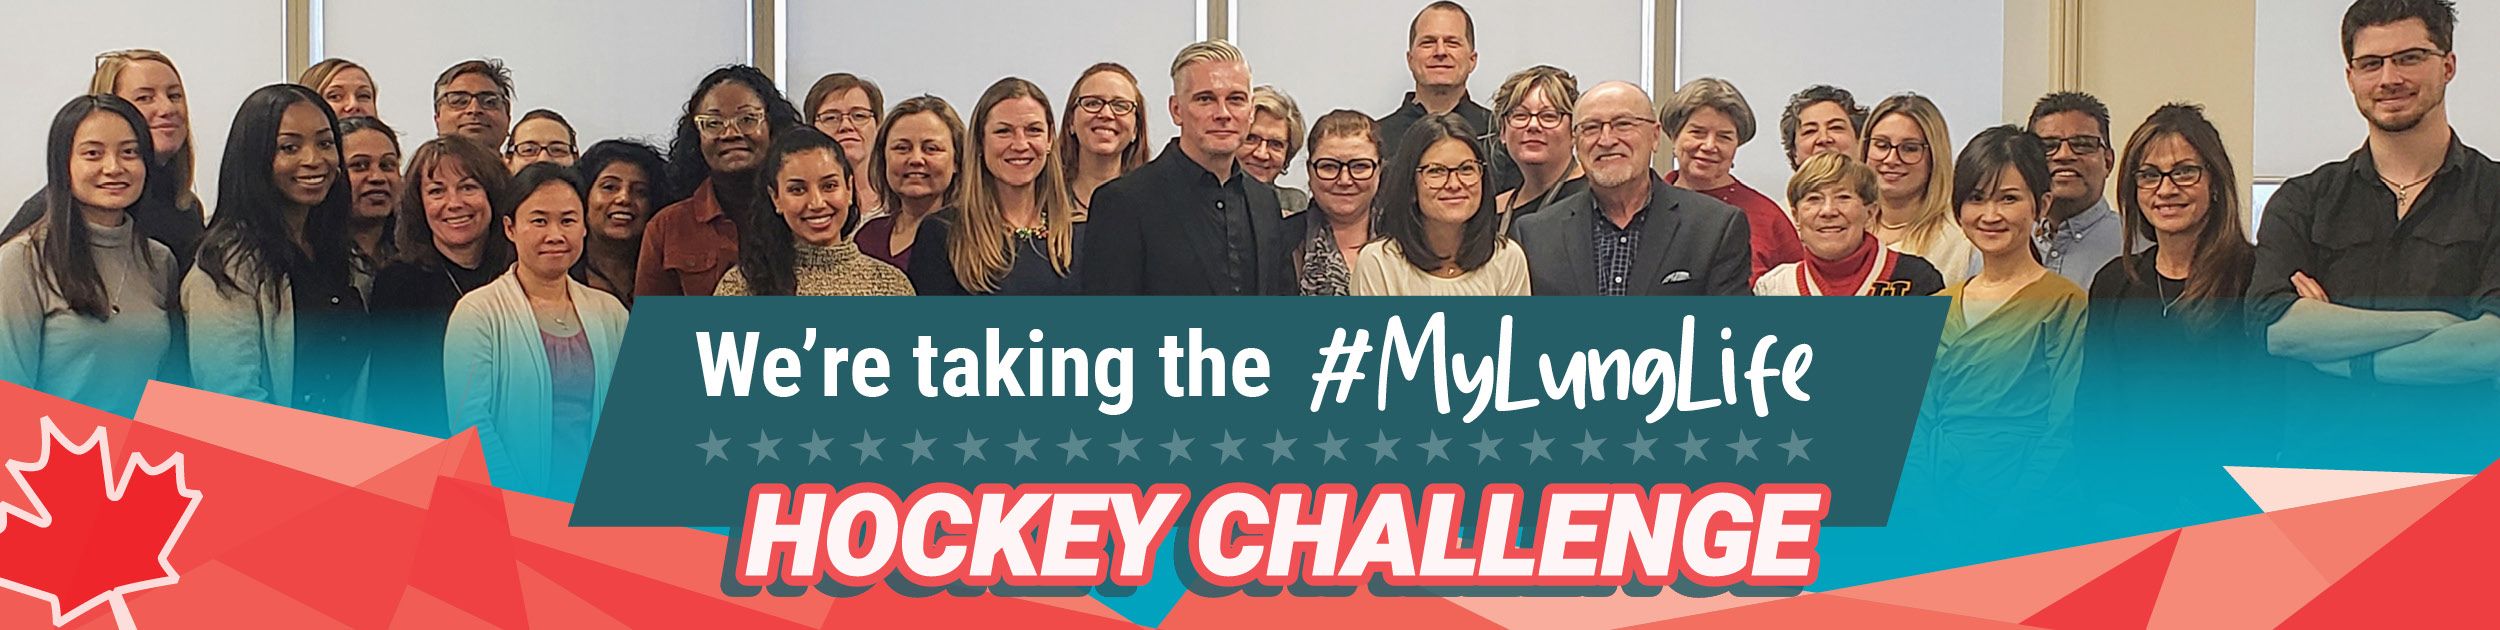 Lung Health Foundation Staff taking part in the #MyLungLife Hockey Challenge